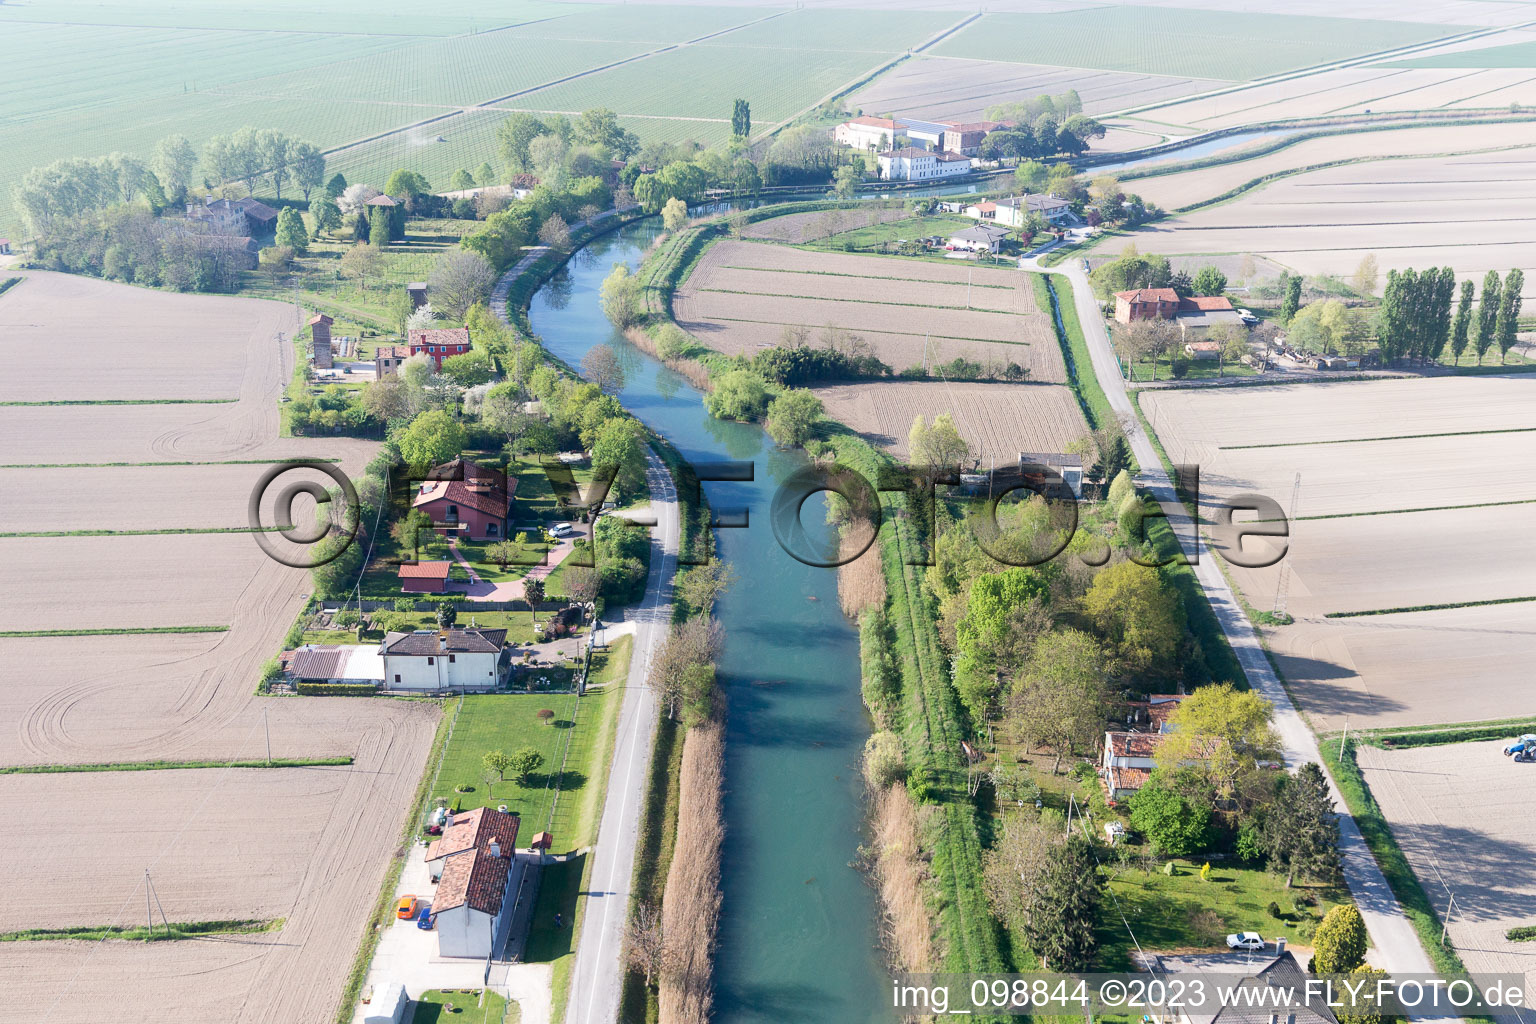 Aerial view of Cavanella in the state Veneto, Italy